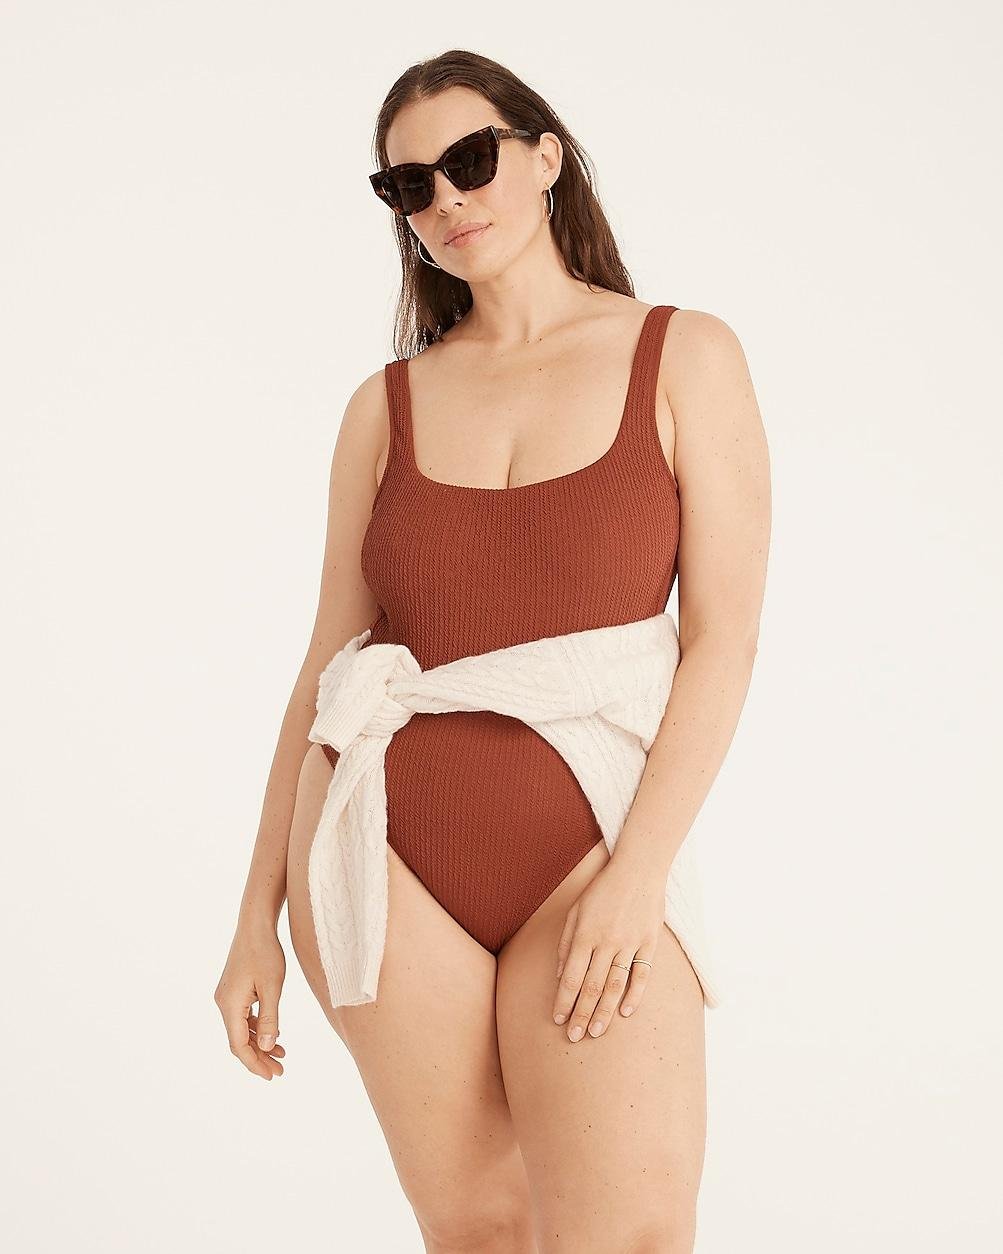 Textured squareneck one-piece by J.CREW